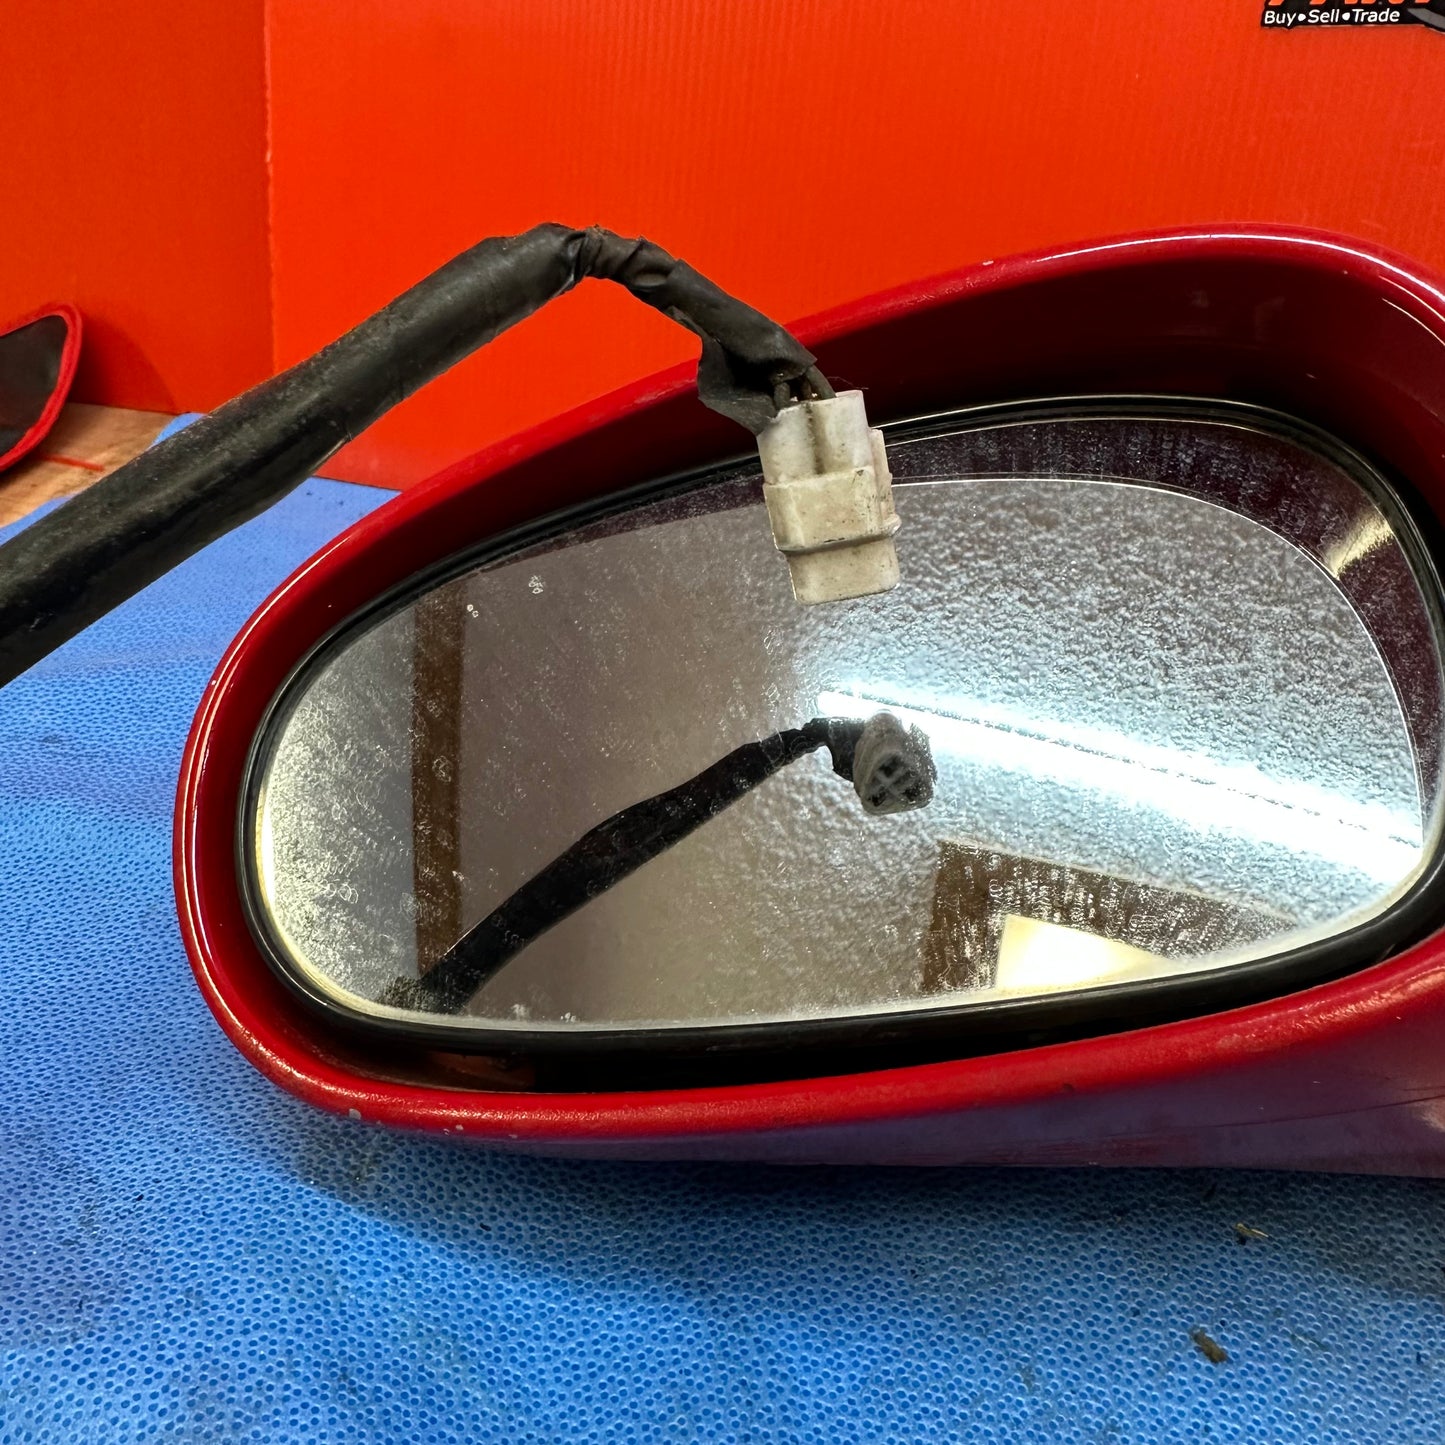 OEM Side view mirrors PAIR LEFT RIGHT DRIVER NO BASES JUST TOP HALF Mazda Rx7 FD3S FD S7B5BSM